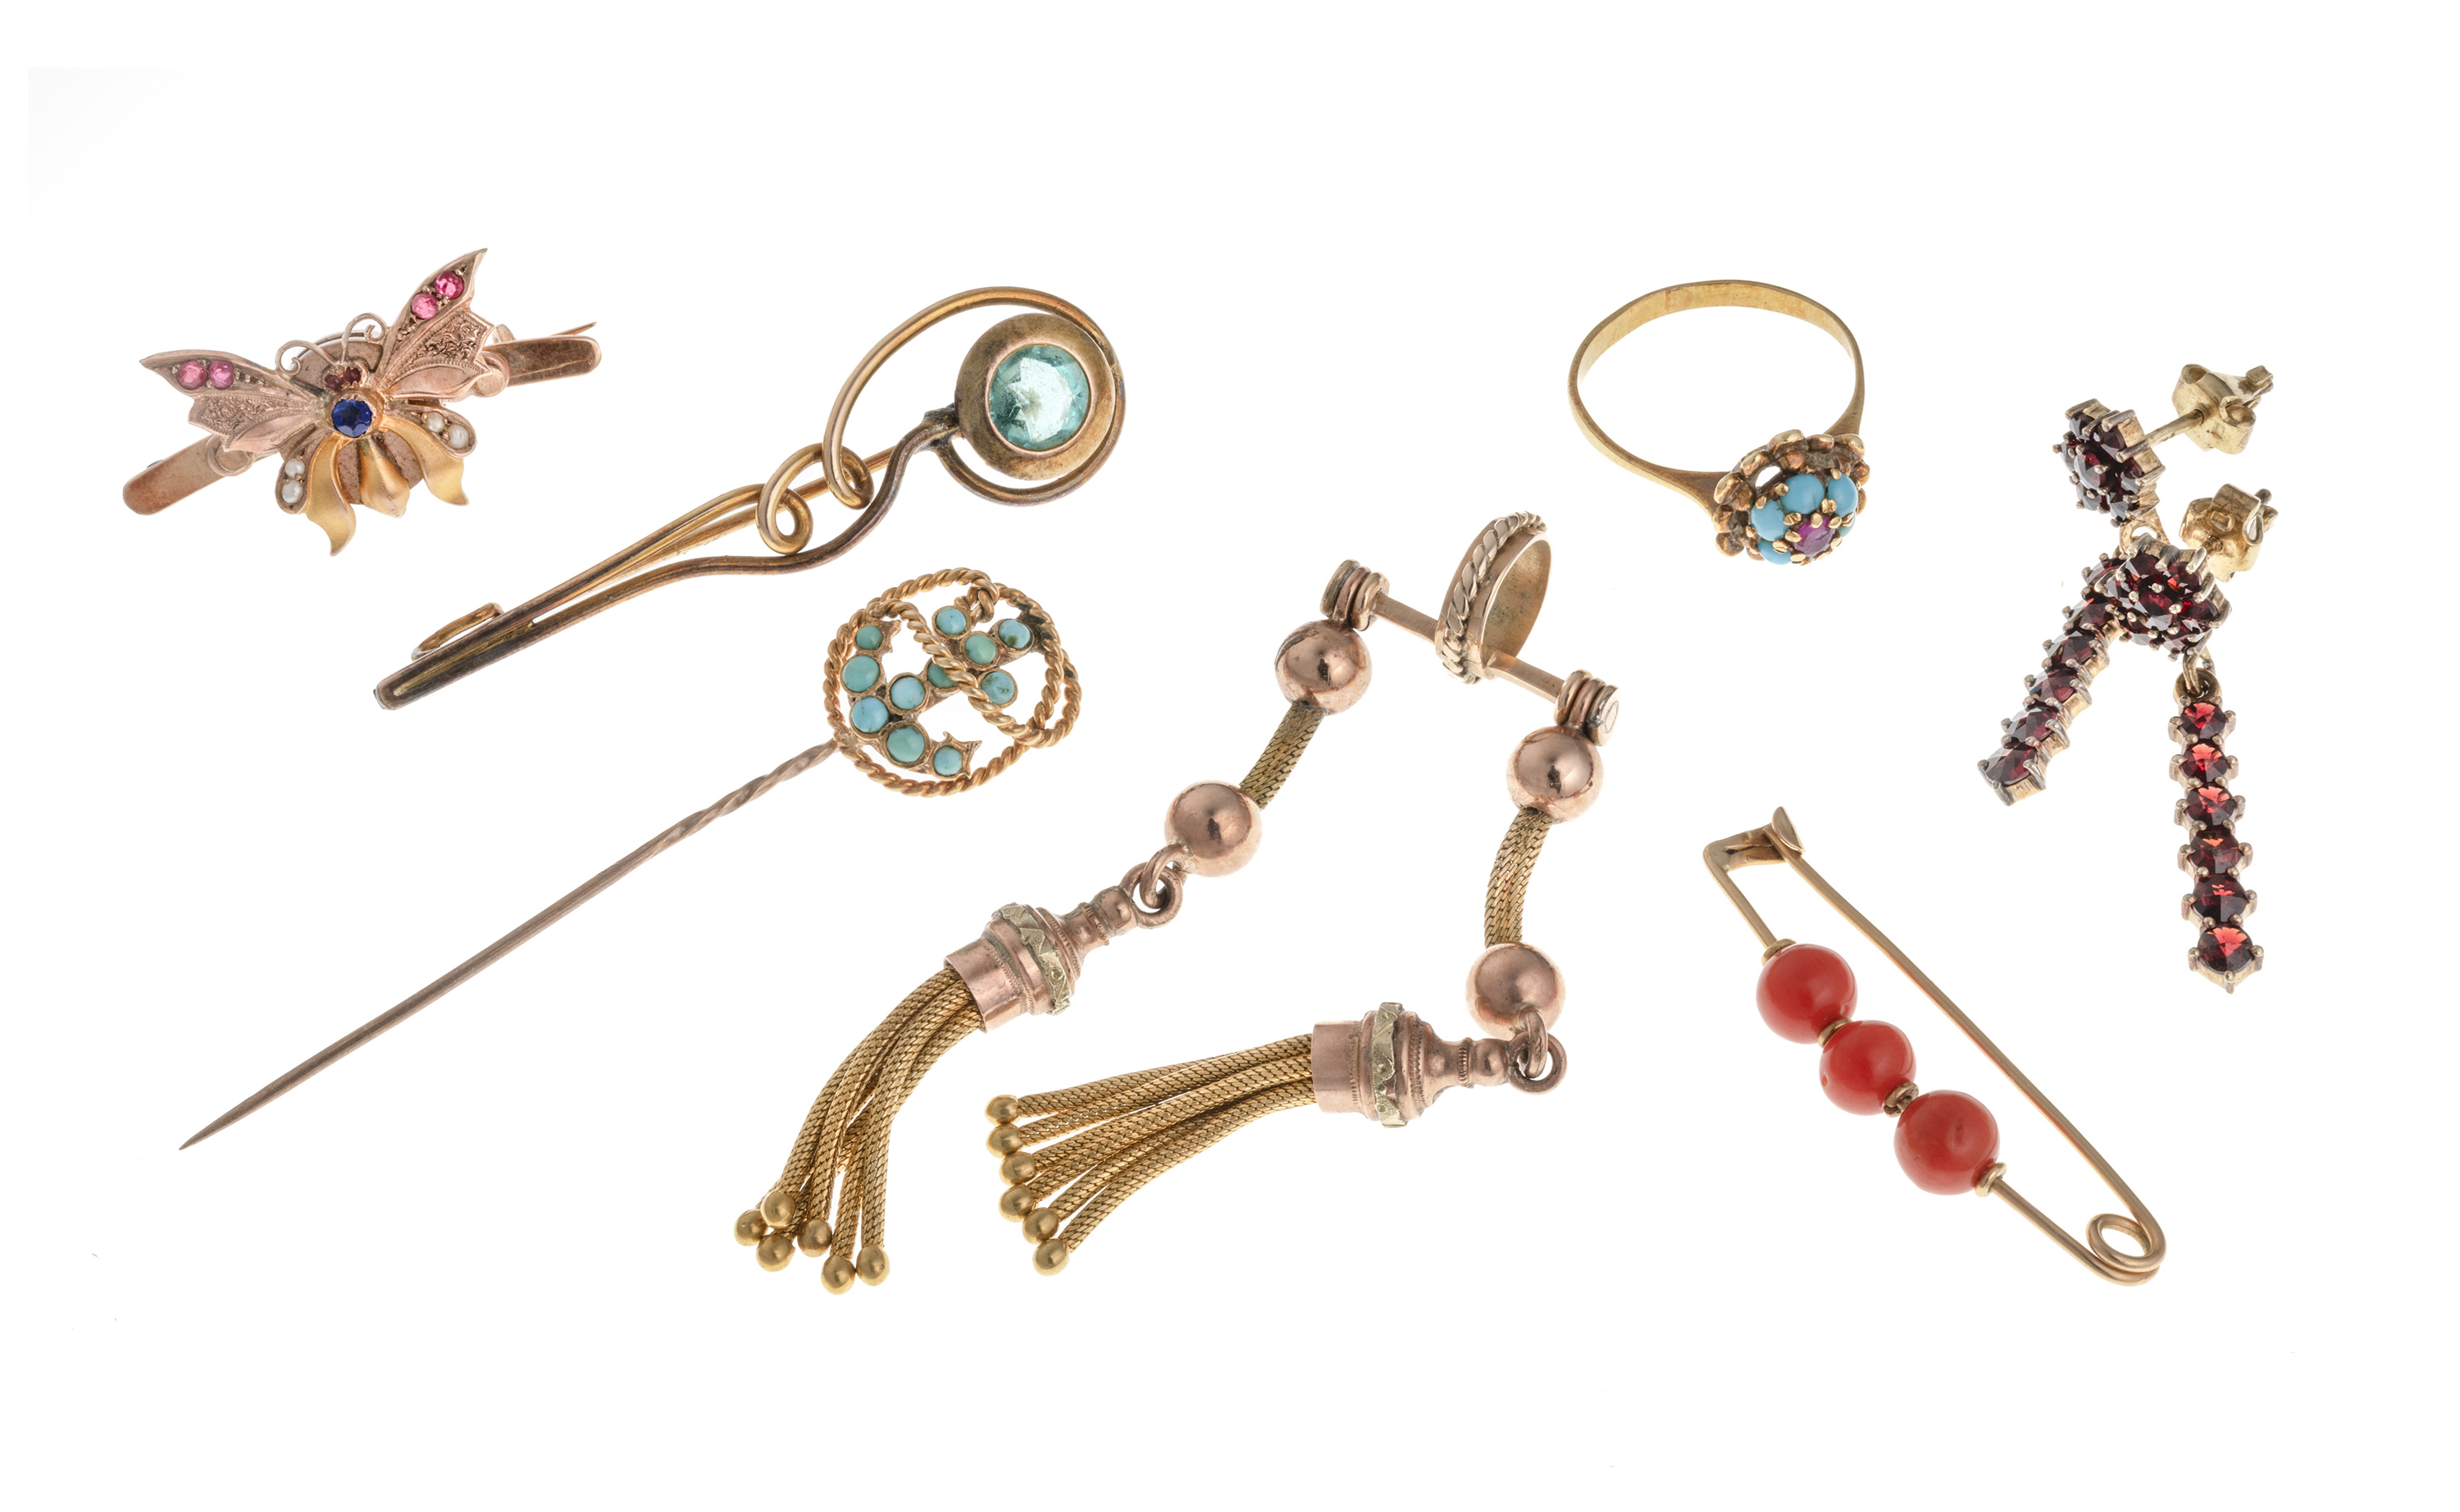 RING, FOUR BROOCHES, EARRINGS AND PENDANT IN GOLD WITH GARNET, TURQUOISES, CORALS AND HARDSTONES